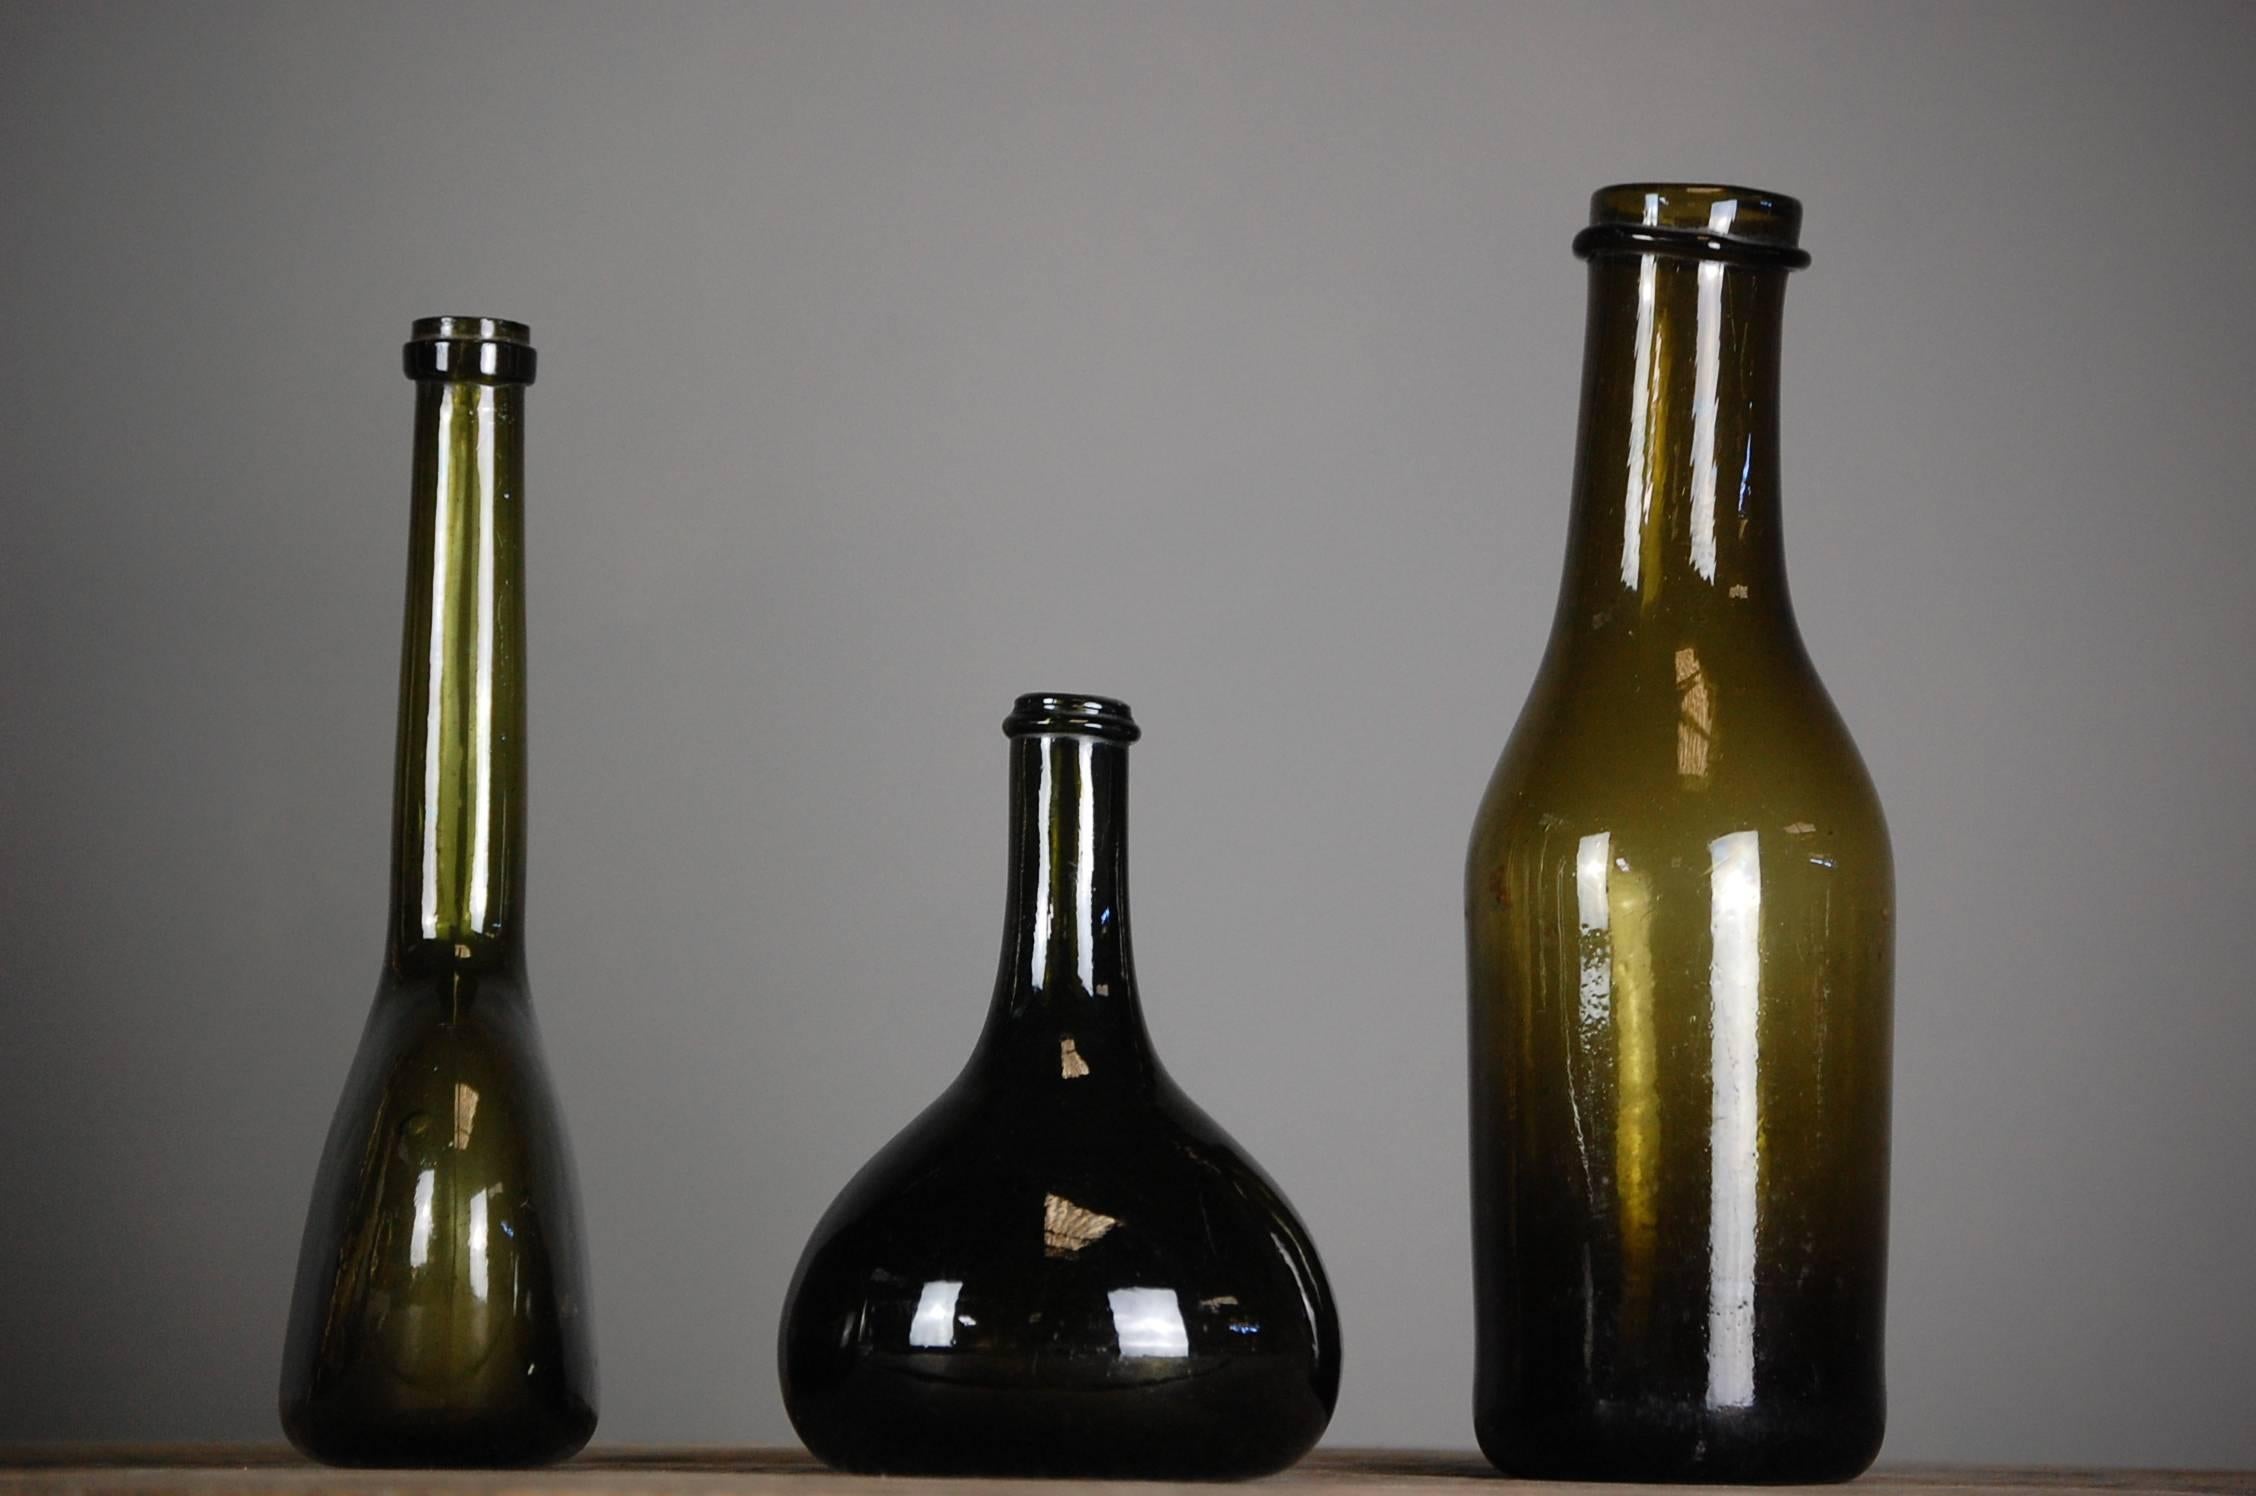 Collection of three early bottles, used for wine or spirit. All in perfect condition. The earliest being the middle bottle, circa 1680. Wonderful decorative collection. All handblown.